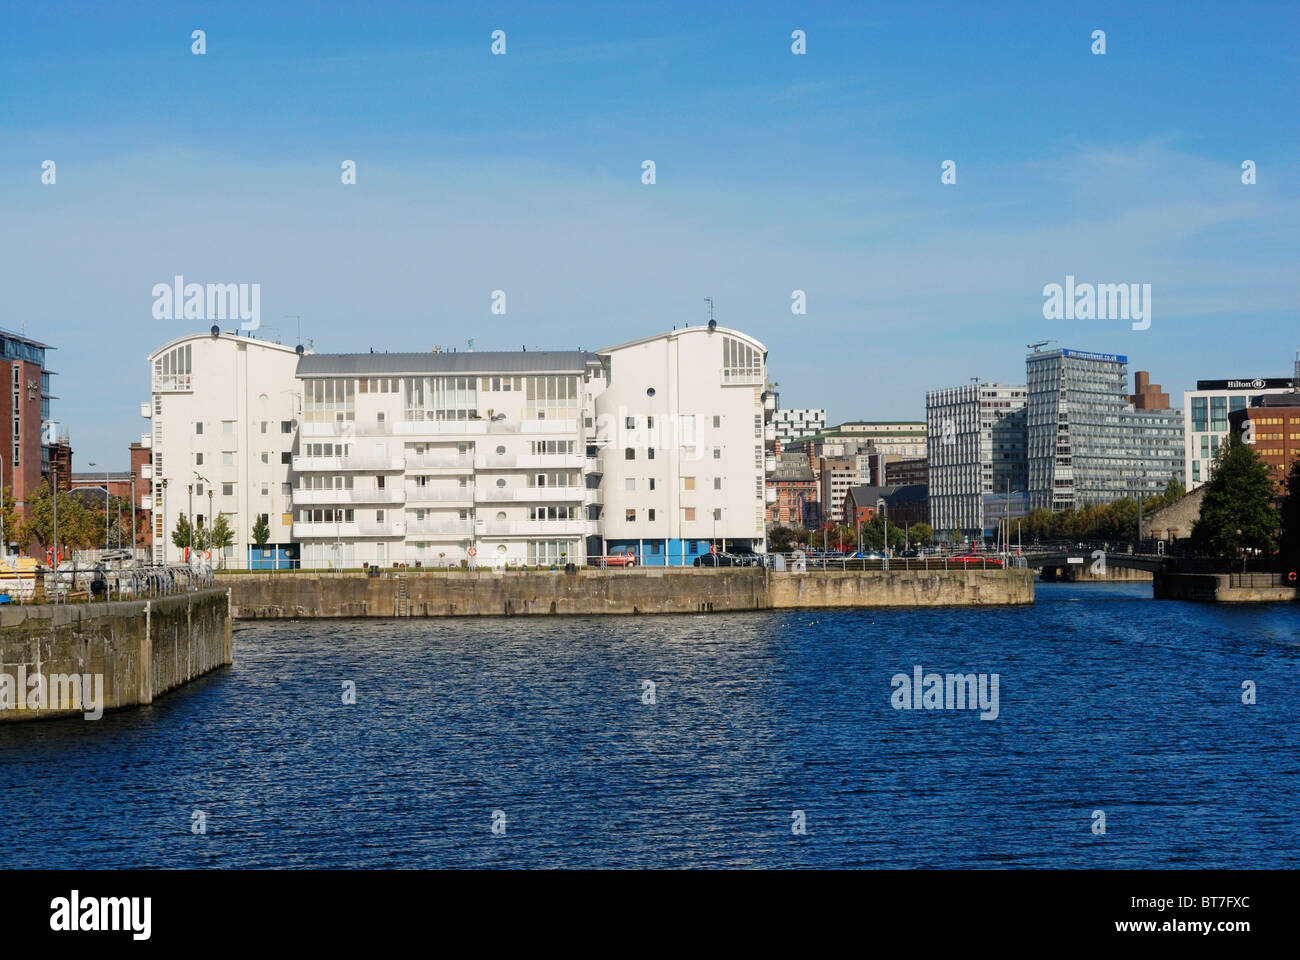 Wapping Quay in Liverpool Docks - regenerated area close to the city centre / Albert Dock / Liverpool Arena attractions. Stock Photo